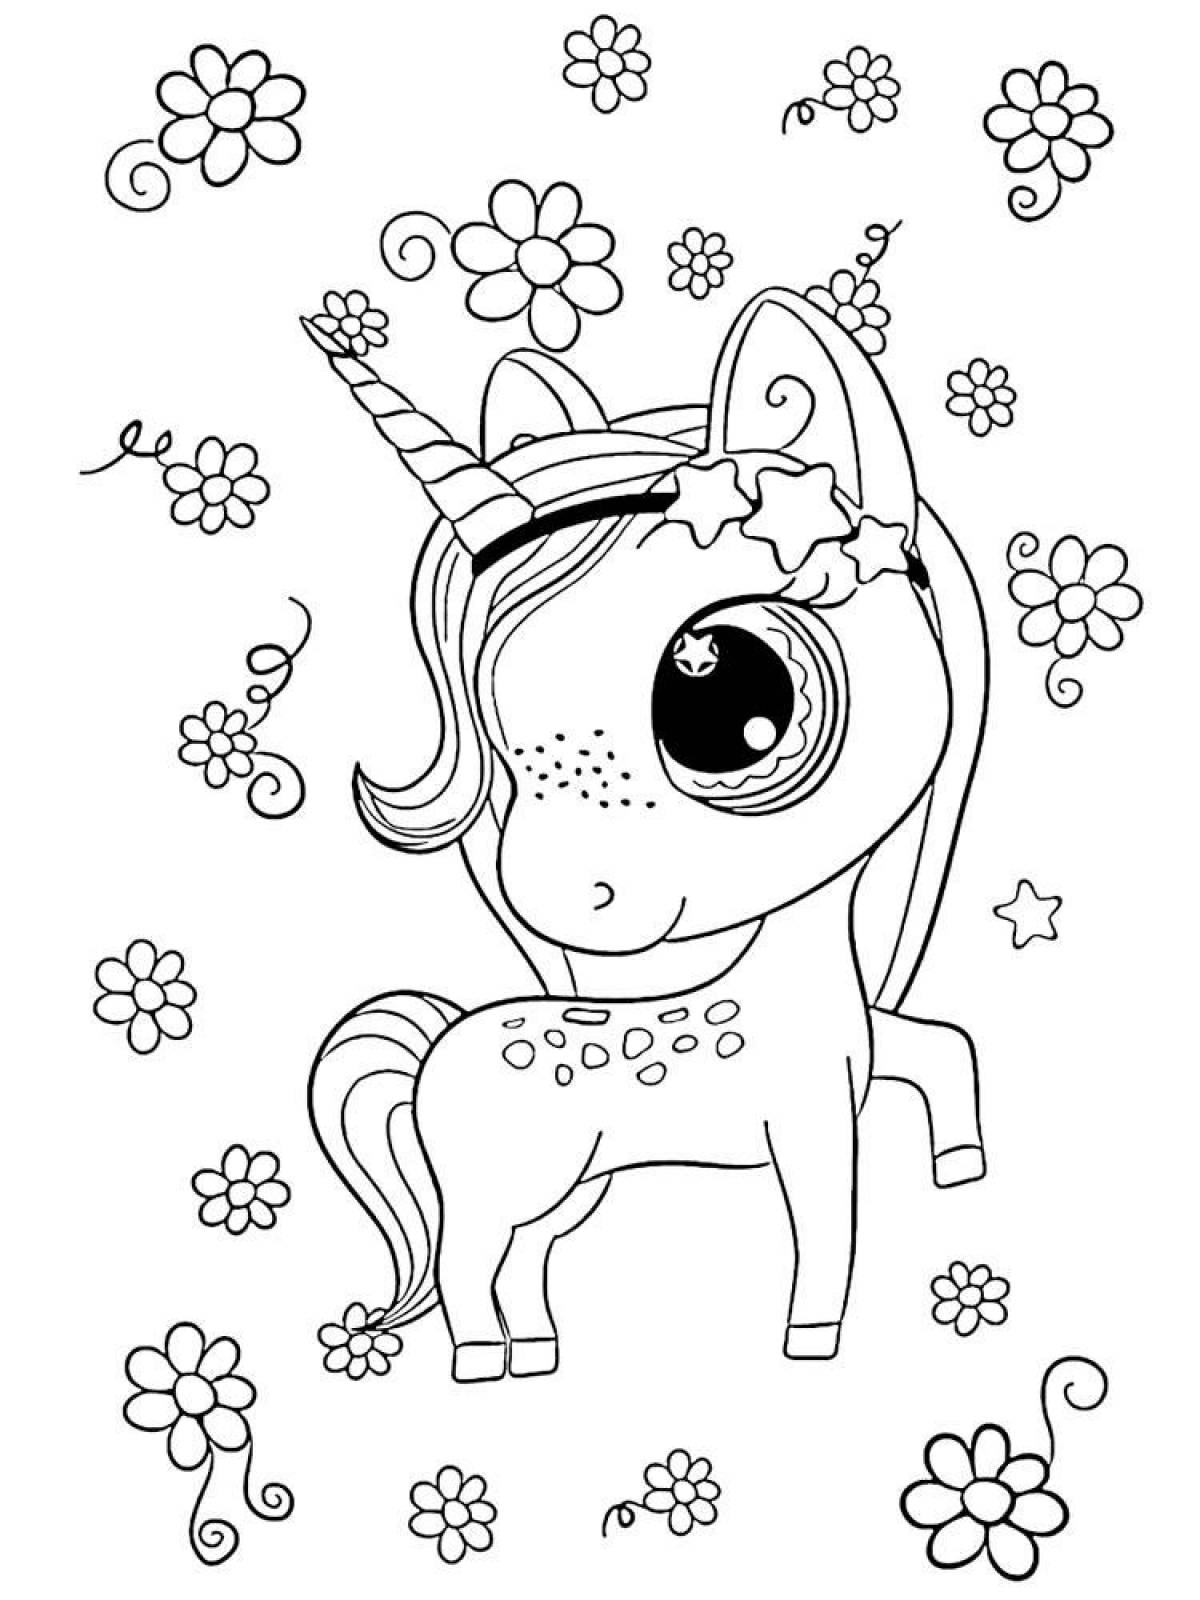 Great unicorn coloring book for kids